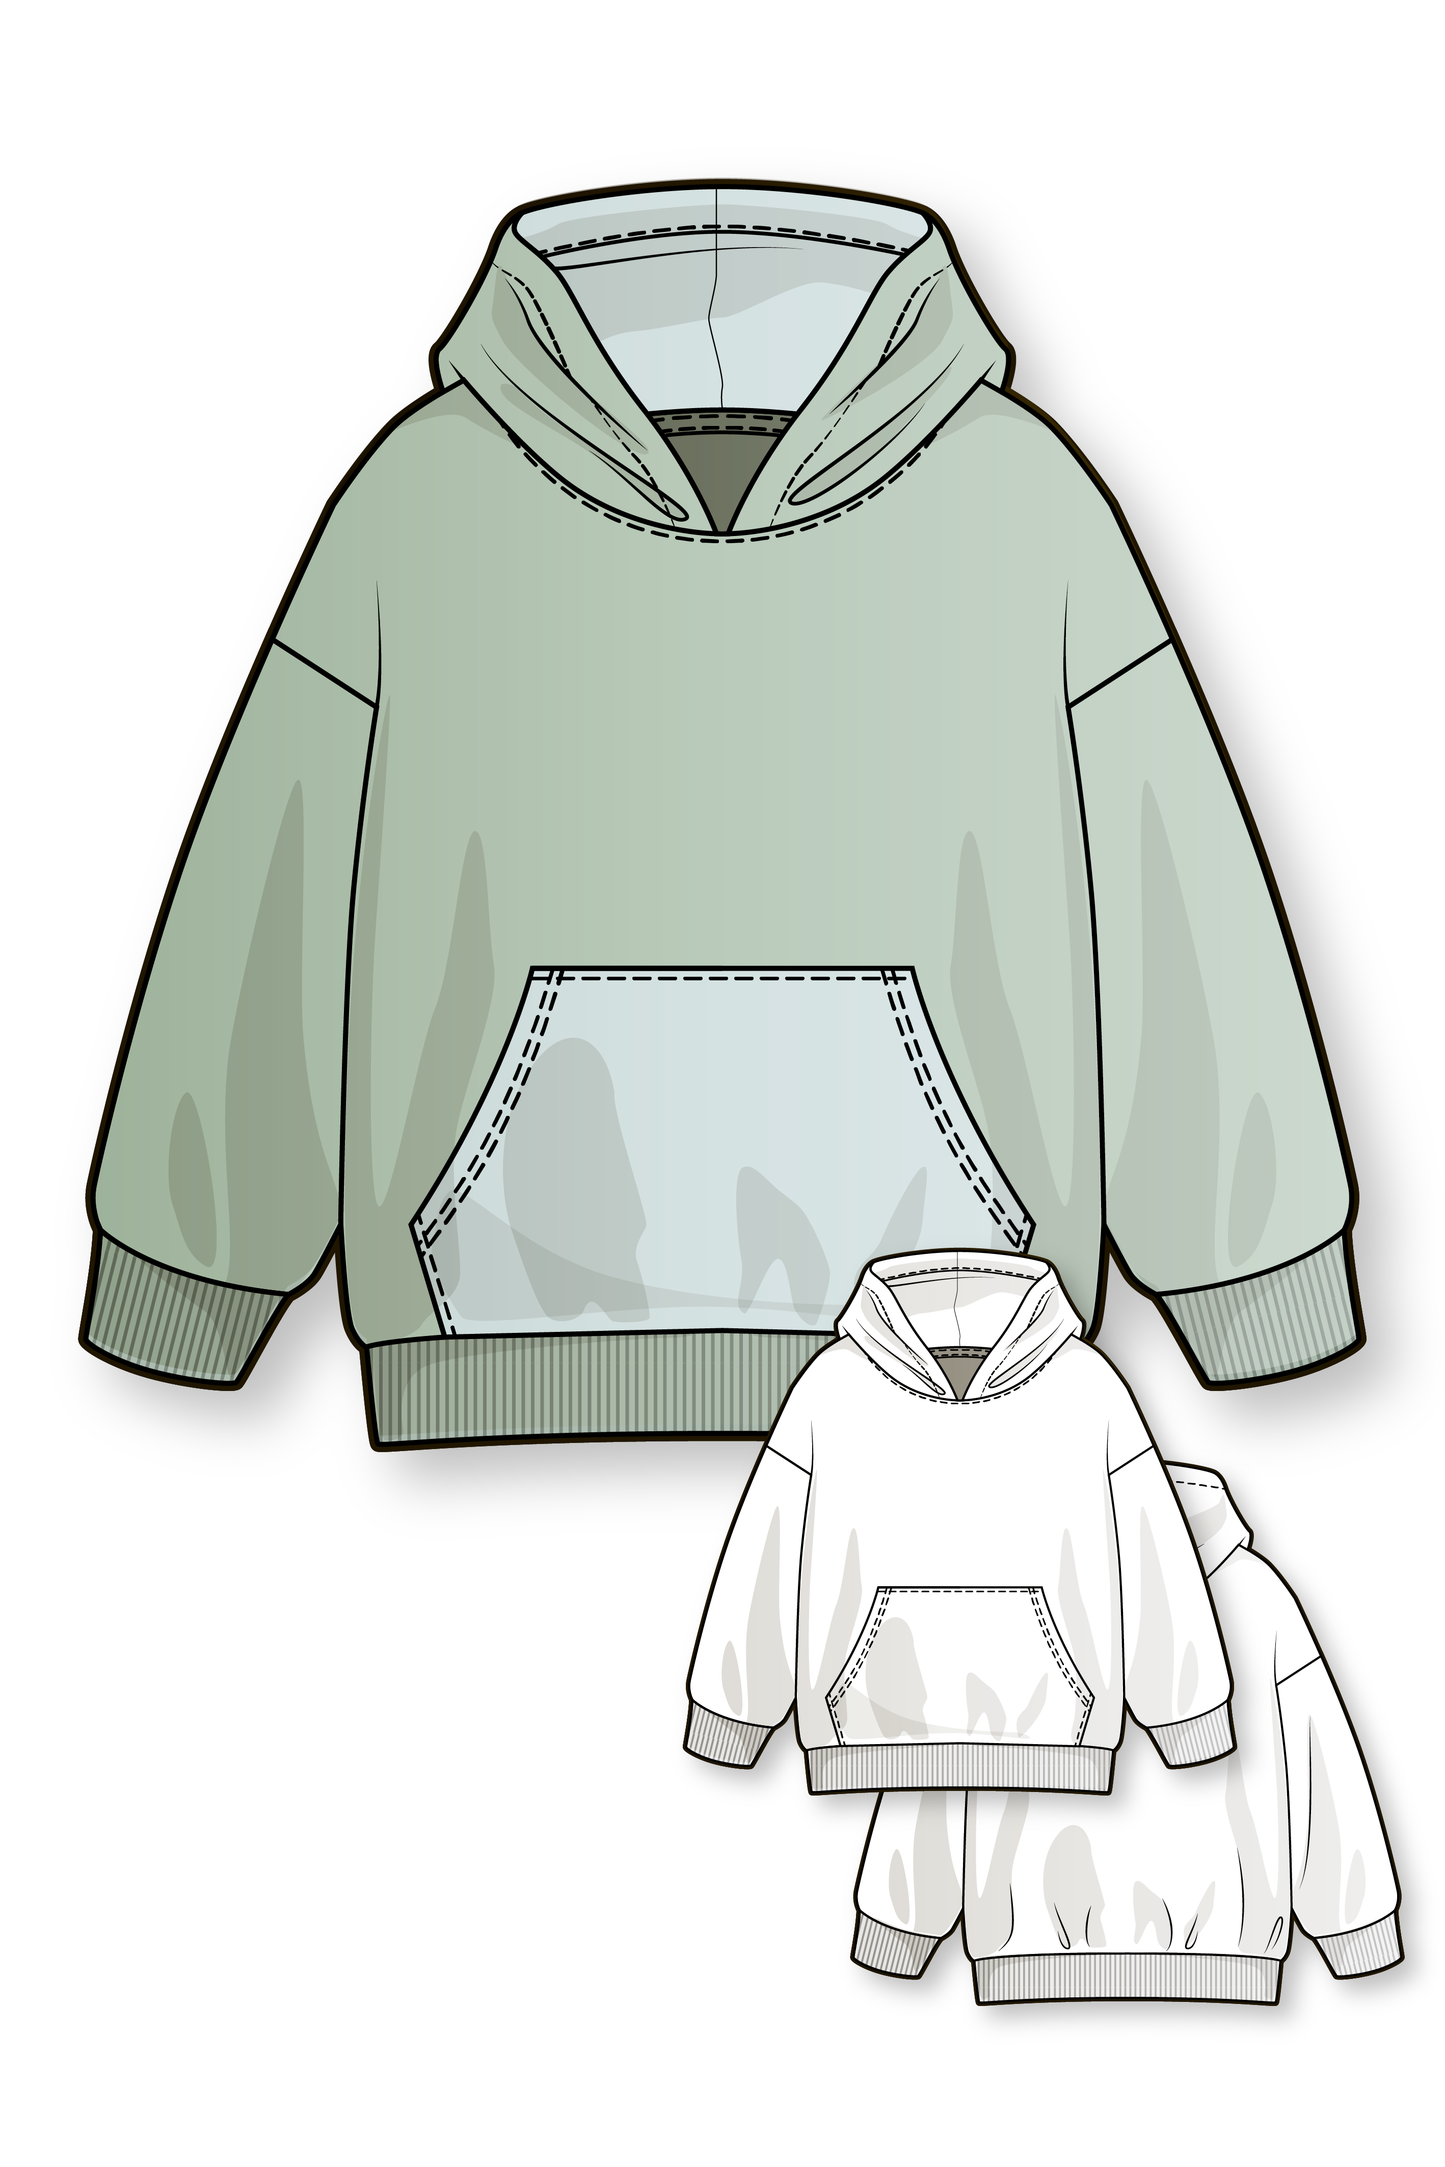 Basic oversize hoodie for boys and girls - PDF sewing pattern for kids - age 1-10 years #7100